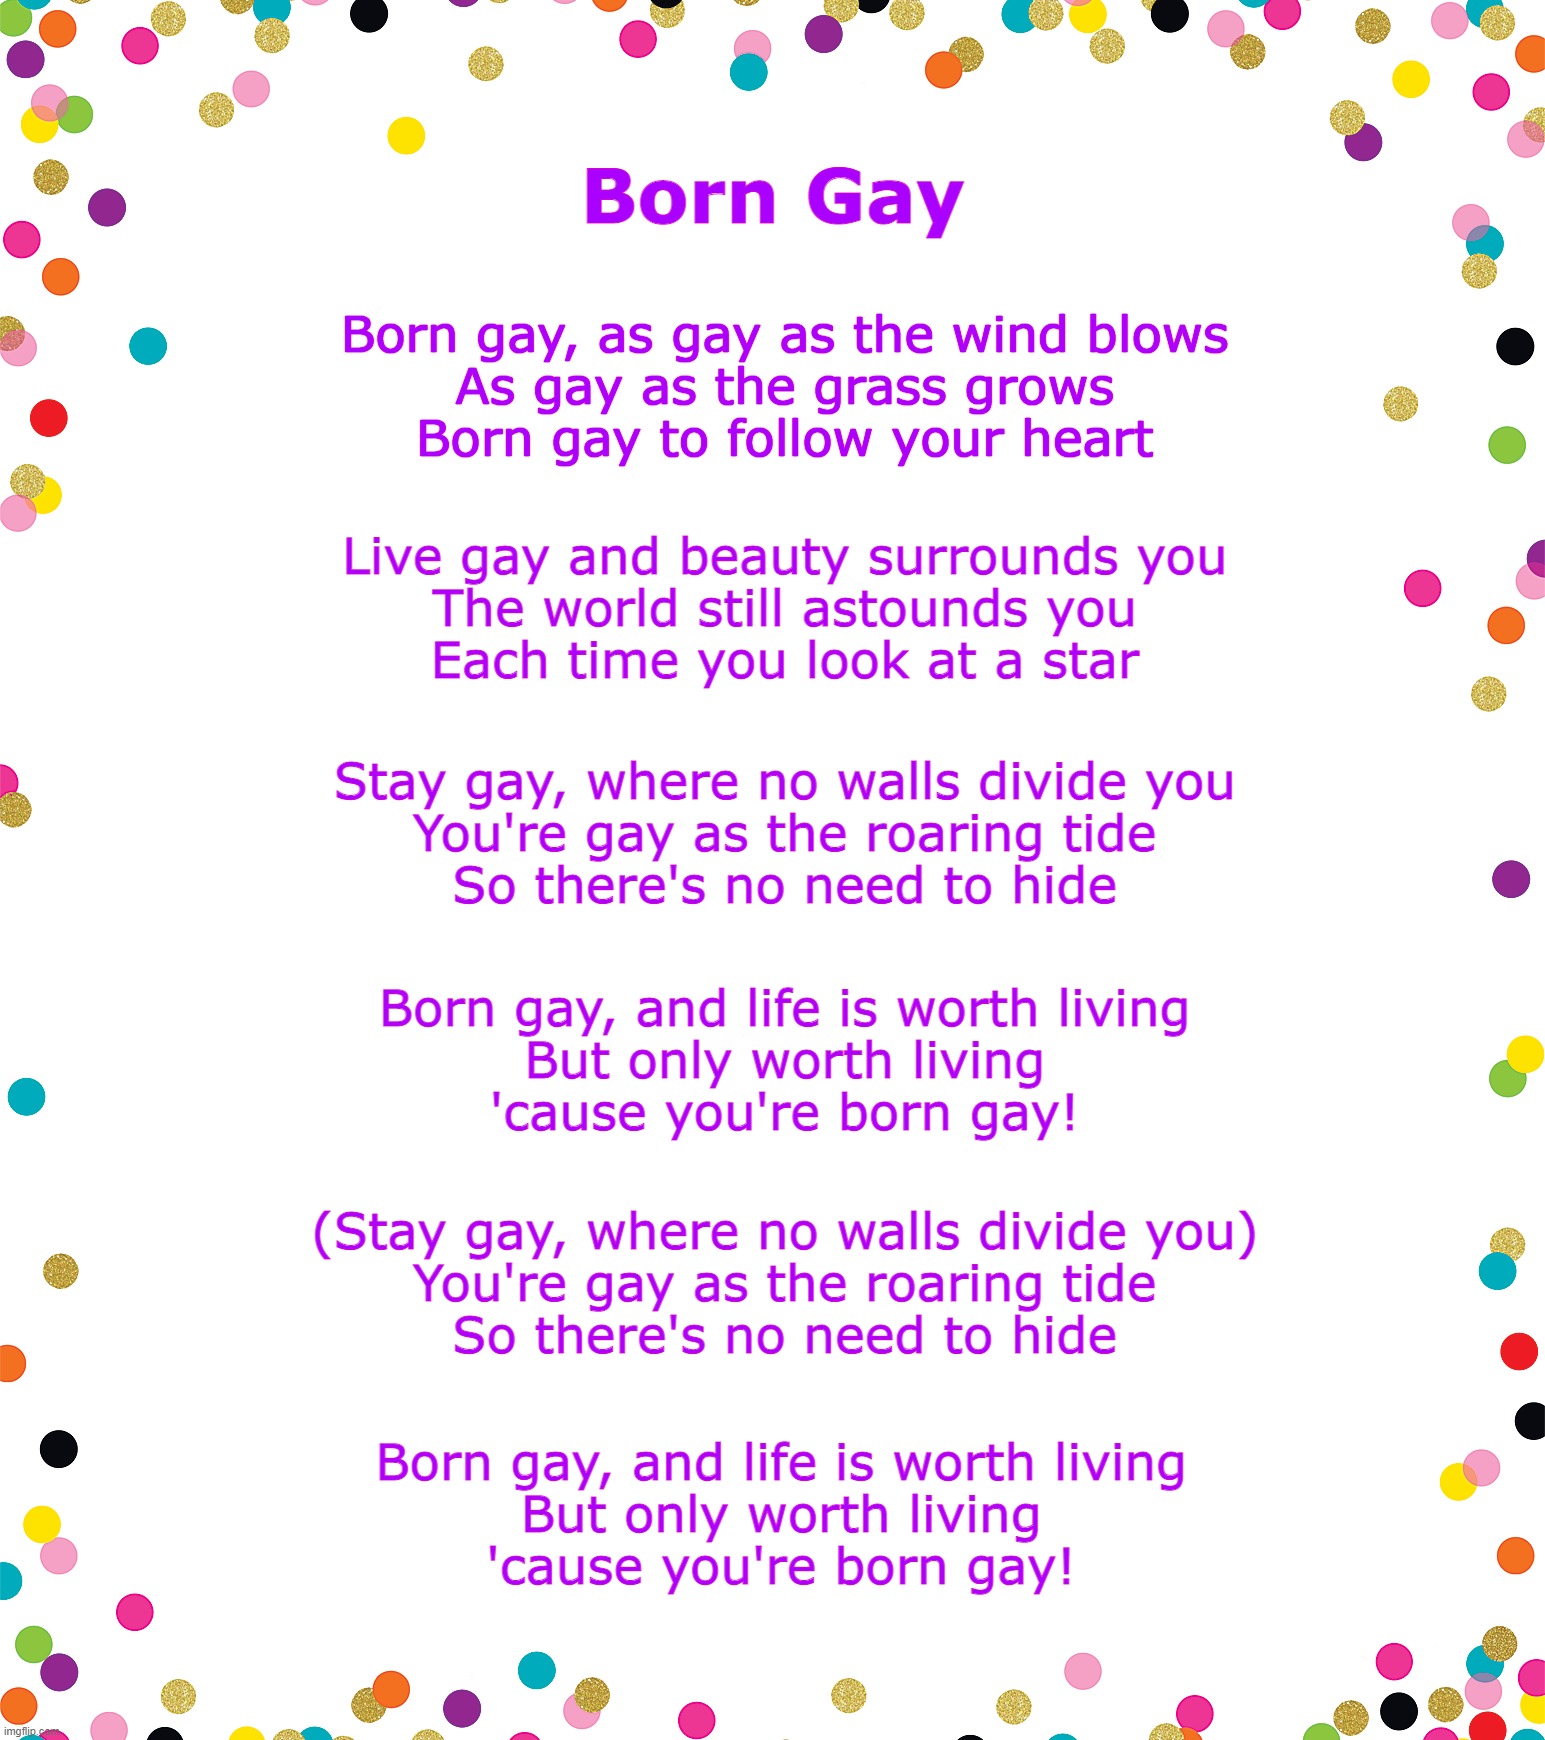 Born Gay? Evolution is Heterosexual. | Born Gay; Born gay, as gay as the wind blows
 As gay as the grass grows
 Born gay to follow your heart; Live gay and beauty surrounds you
 The world still astounds you
 Each time you look at a star; Stay gay, where no walls divide you
 You're gay as the roaring tide
 So there's no need to hide; Born gay, and life is worth living
 But only worth living
 'cause you're born gay! (Stay gay, where no walls divide you)
 You're gay as the roaring tide
 So there's no need to hide; Born gay, and life is worth living
 But only worth living
 'cause you're born gay! | image tagged in gay pride,gay marriage,evolution,homosexual,transgender | made w/ Imgflip meme maker